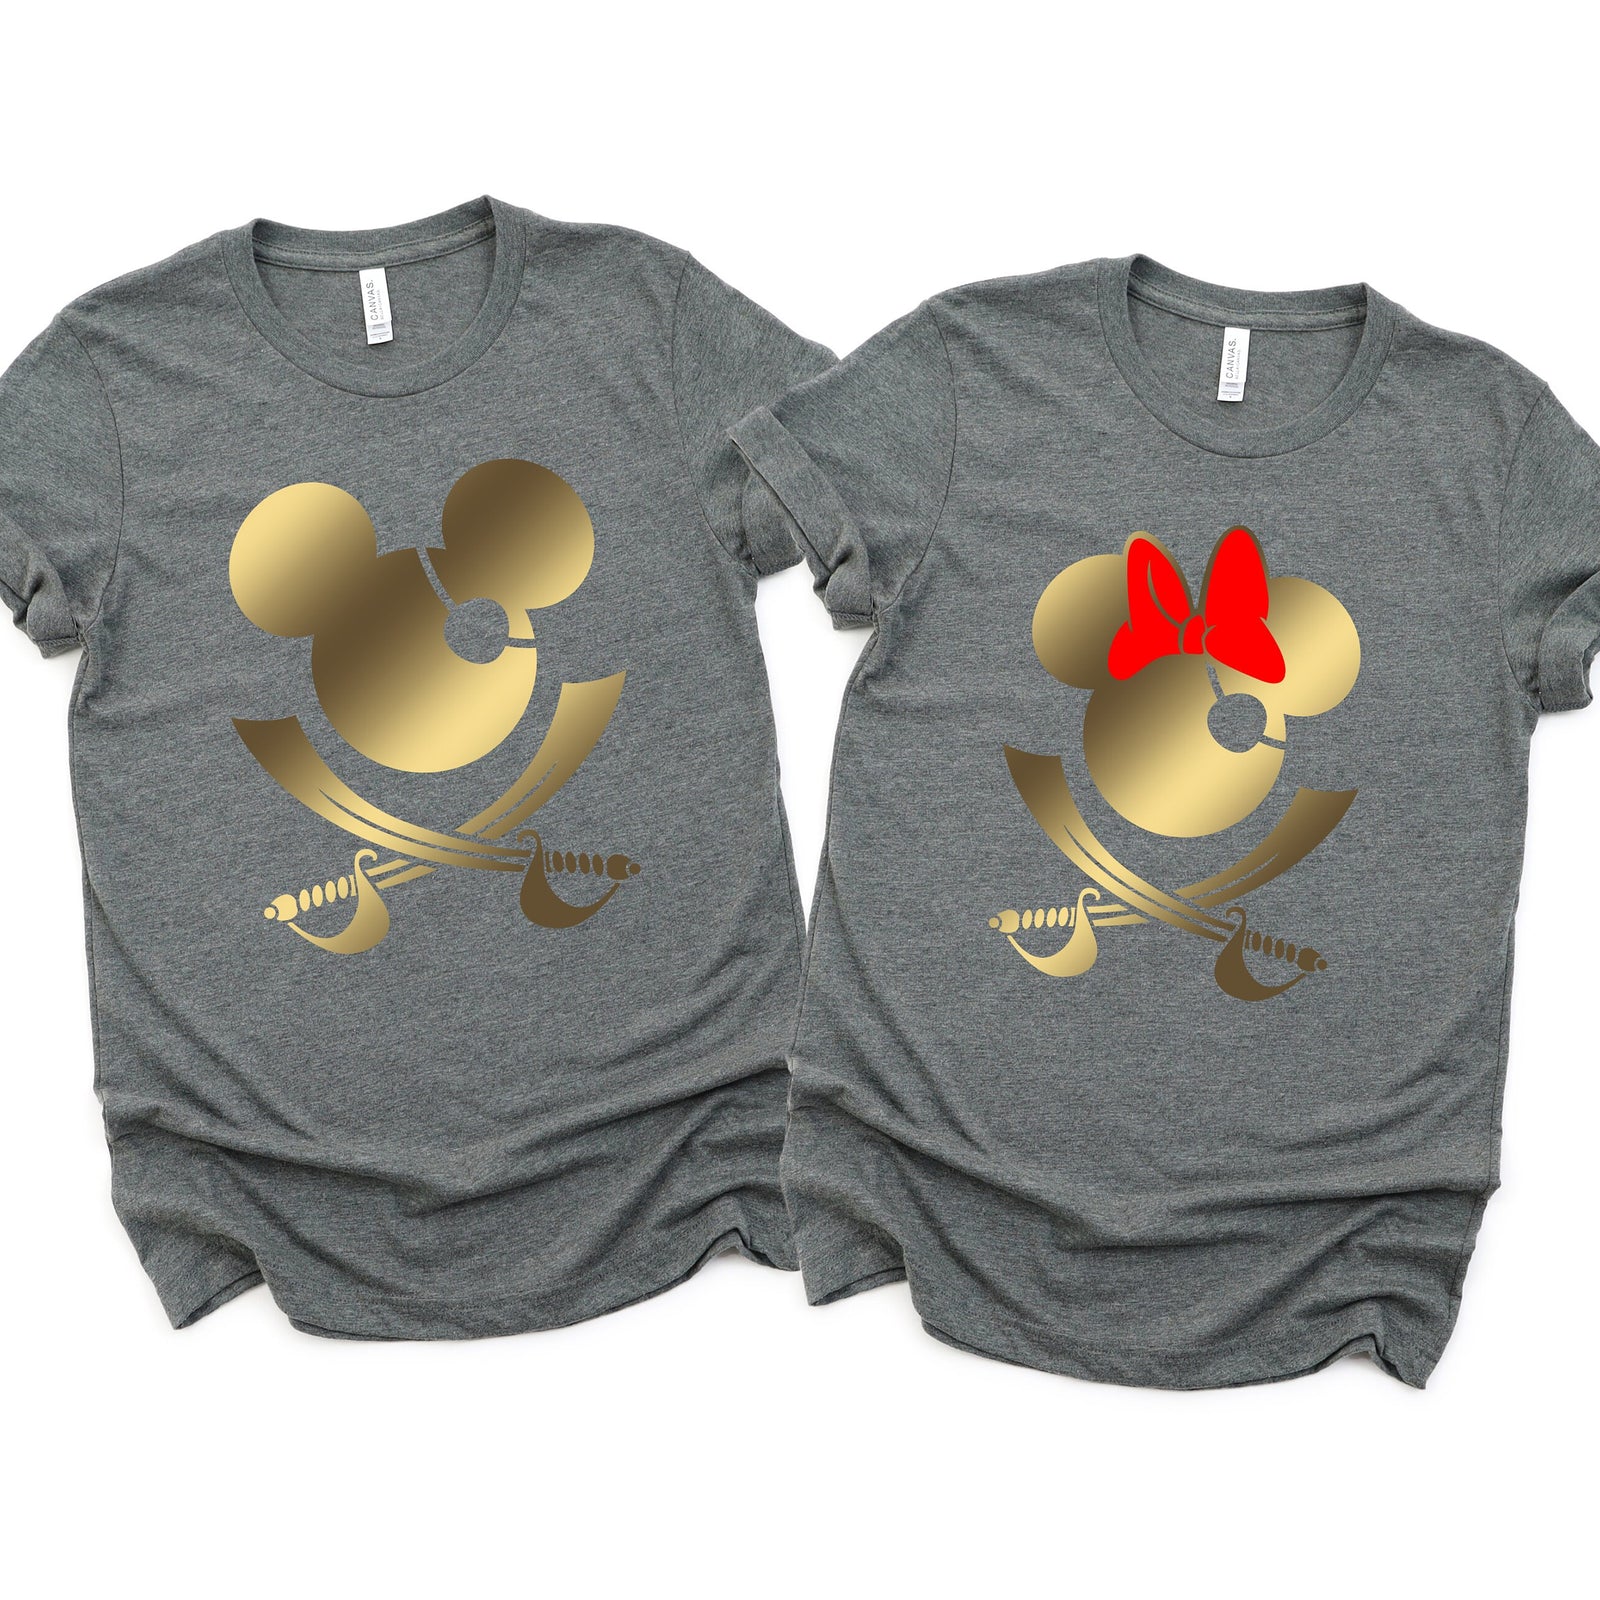 Pirate Minnie and Mickey Shirts - Disney Couples Shirt - Matching Disney Cruise Shirts - Minnie and Mickey Couple Shirt